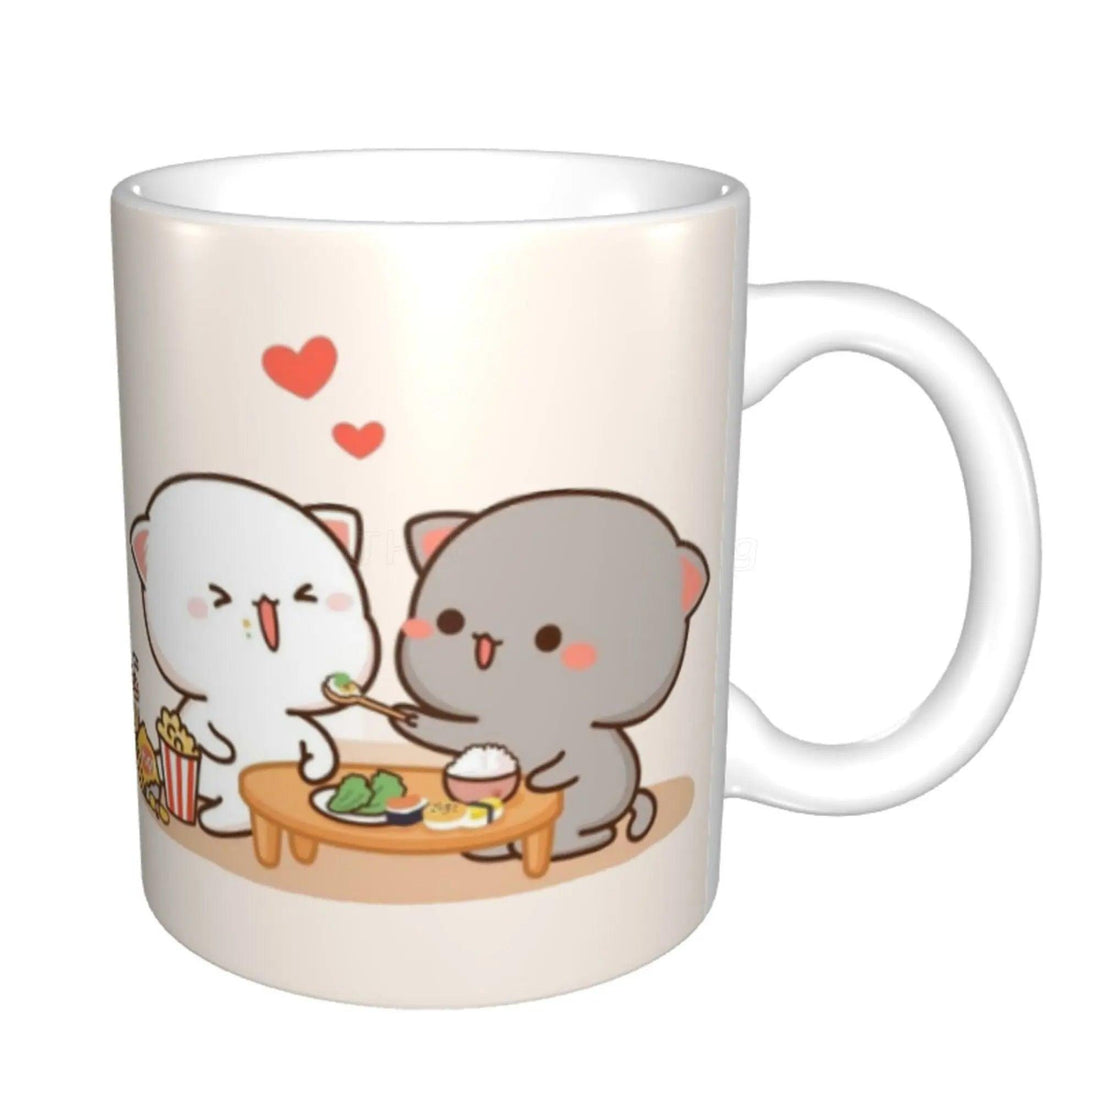 Peach and Goma Mug, 16 Designs - Just Cats - Gifts for Cat Lovers